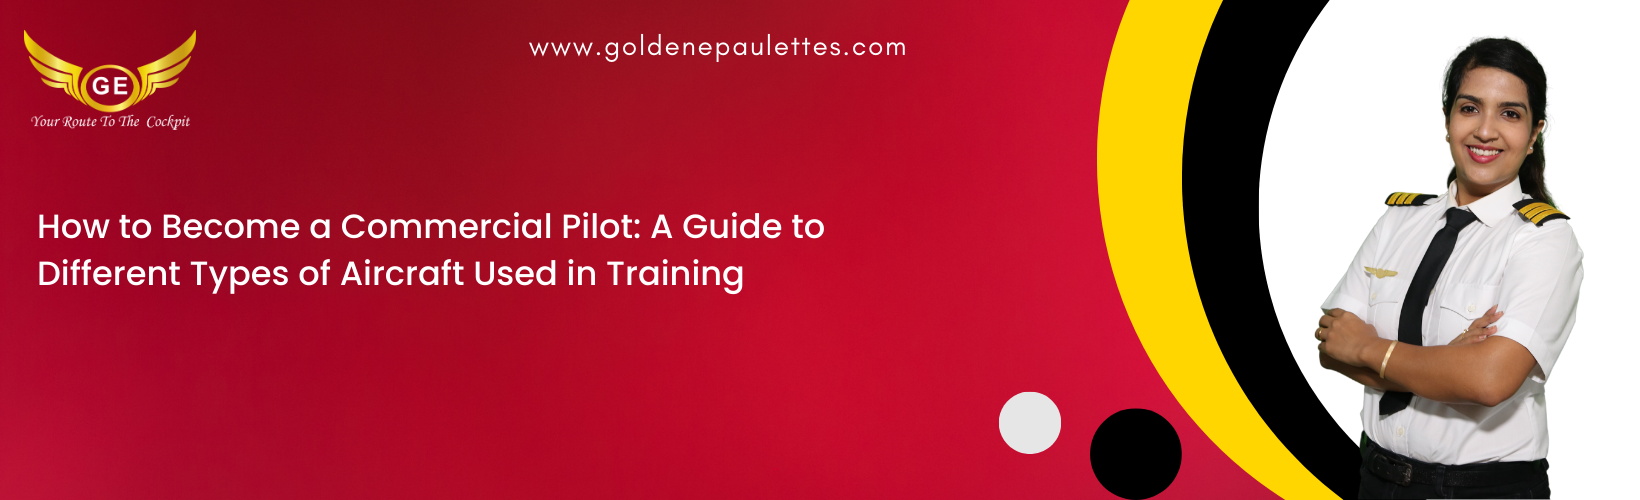 The Different Types of Aircraft Used in Commercial Pilot Training – This article will discuss the different types of aircraft used in commercial pilot training, such as single